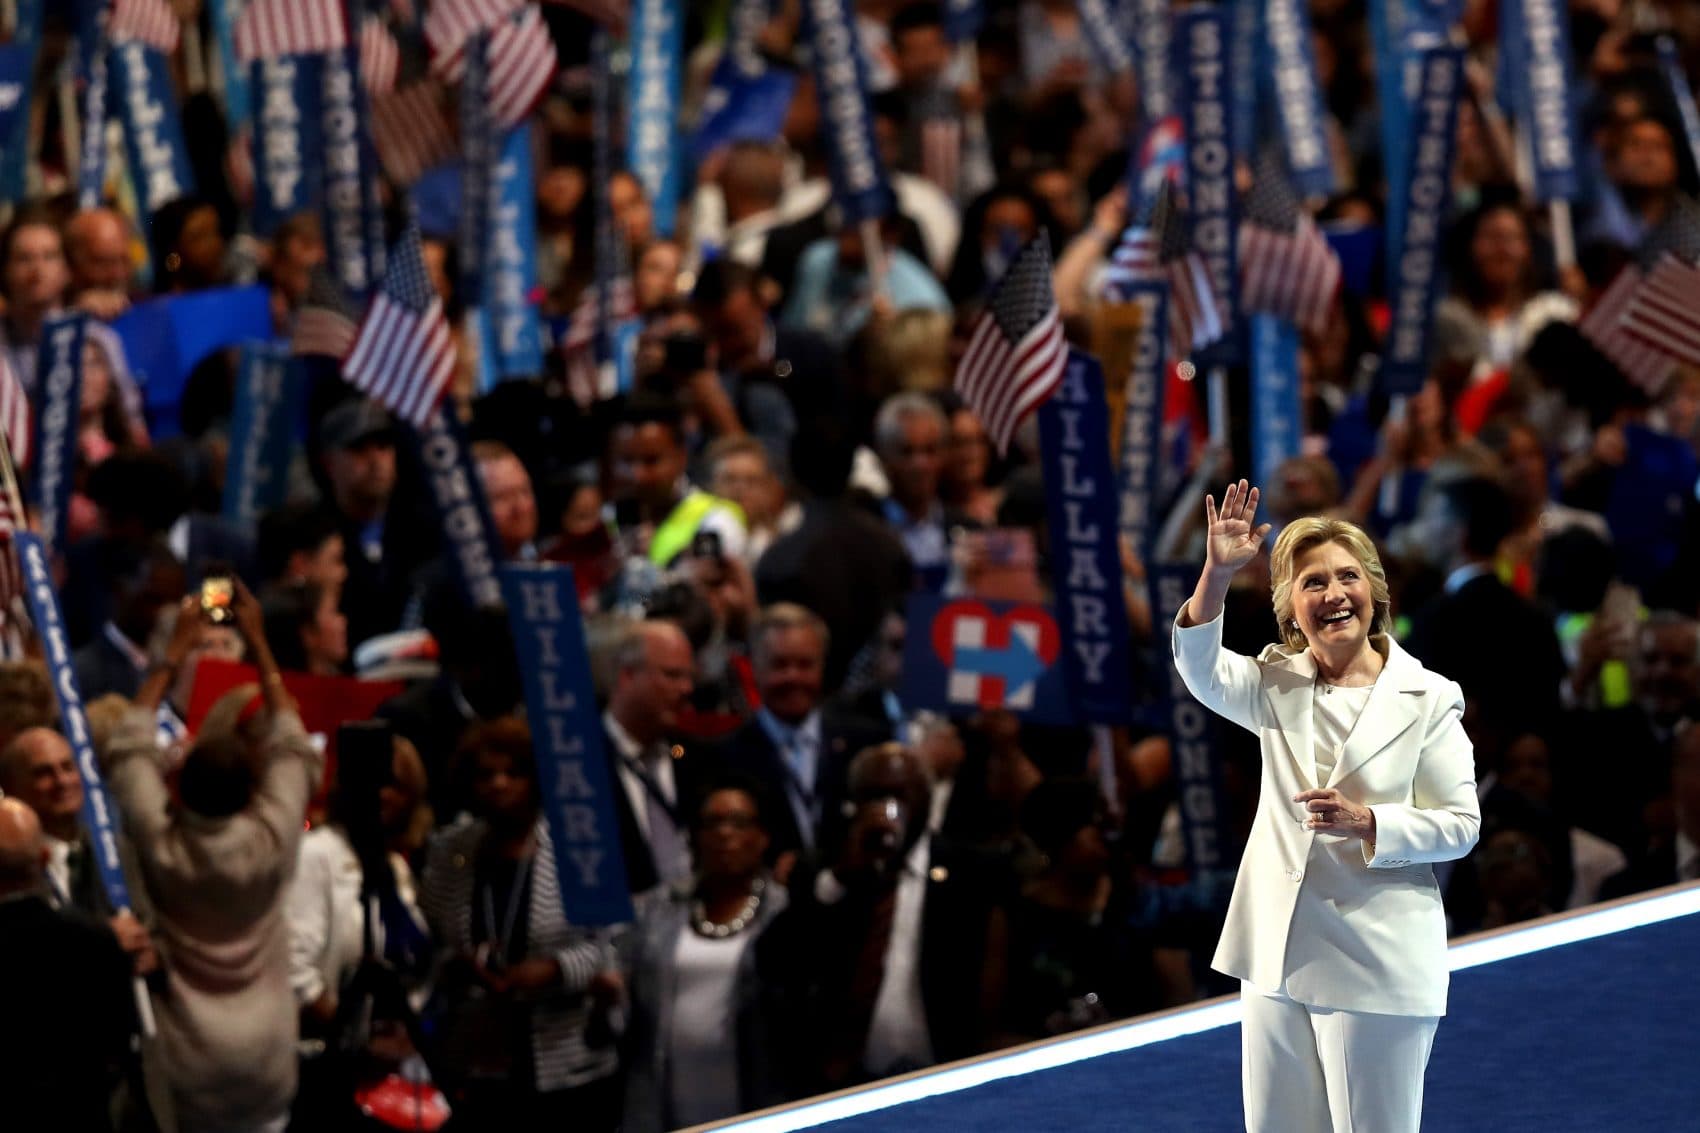 Democratic presidential nominee Hillary Clinton acknowledges the crowd at the end on the fourth day of the Democratic National Convention at the Wells Fargo Center, July 28, 2016 in Philadelphia. (Joe Raedle/Getty Images)